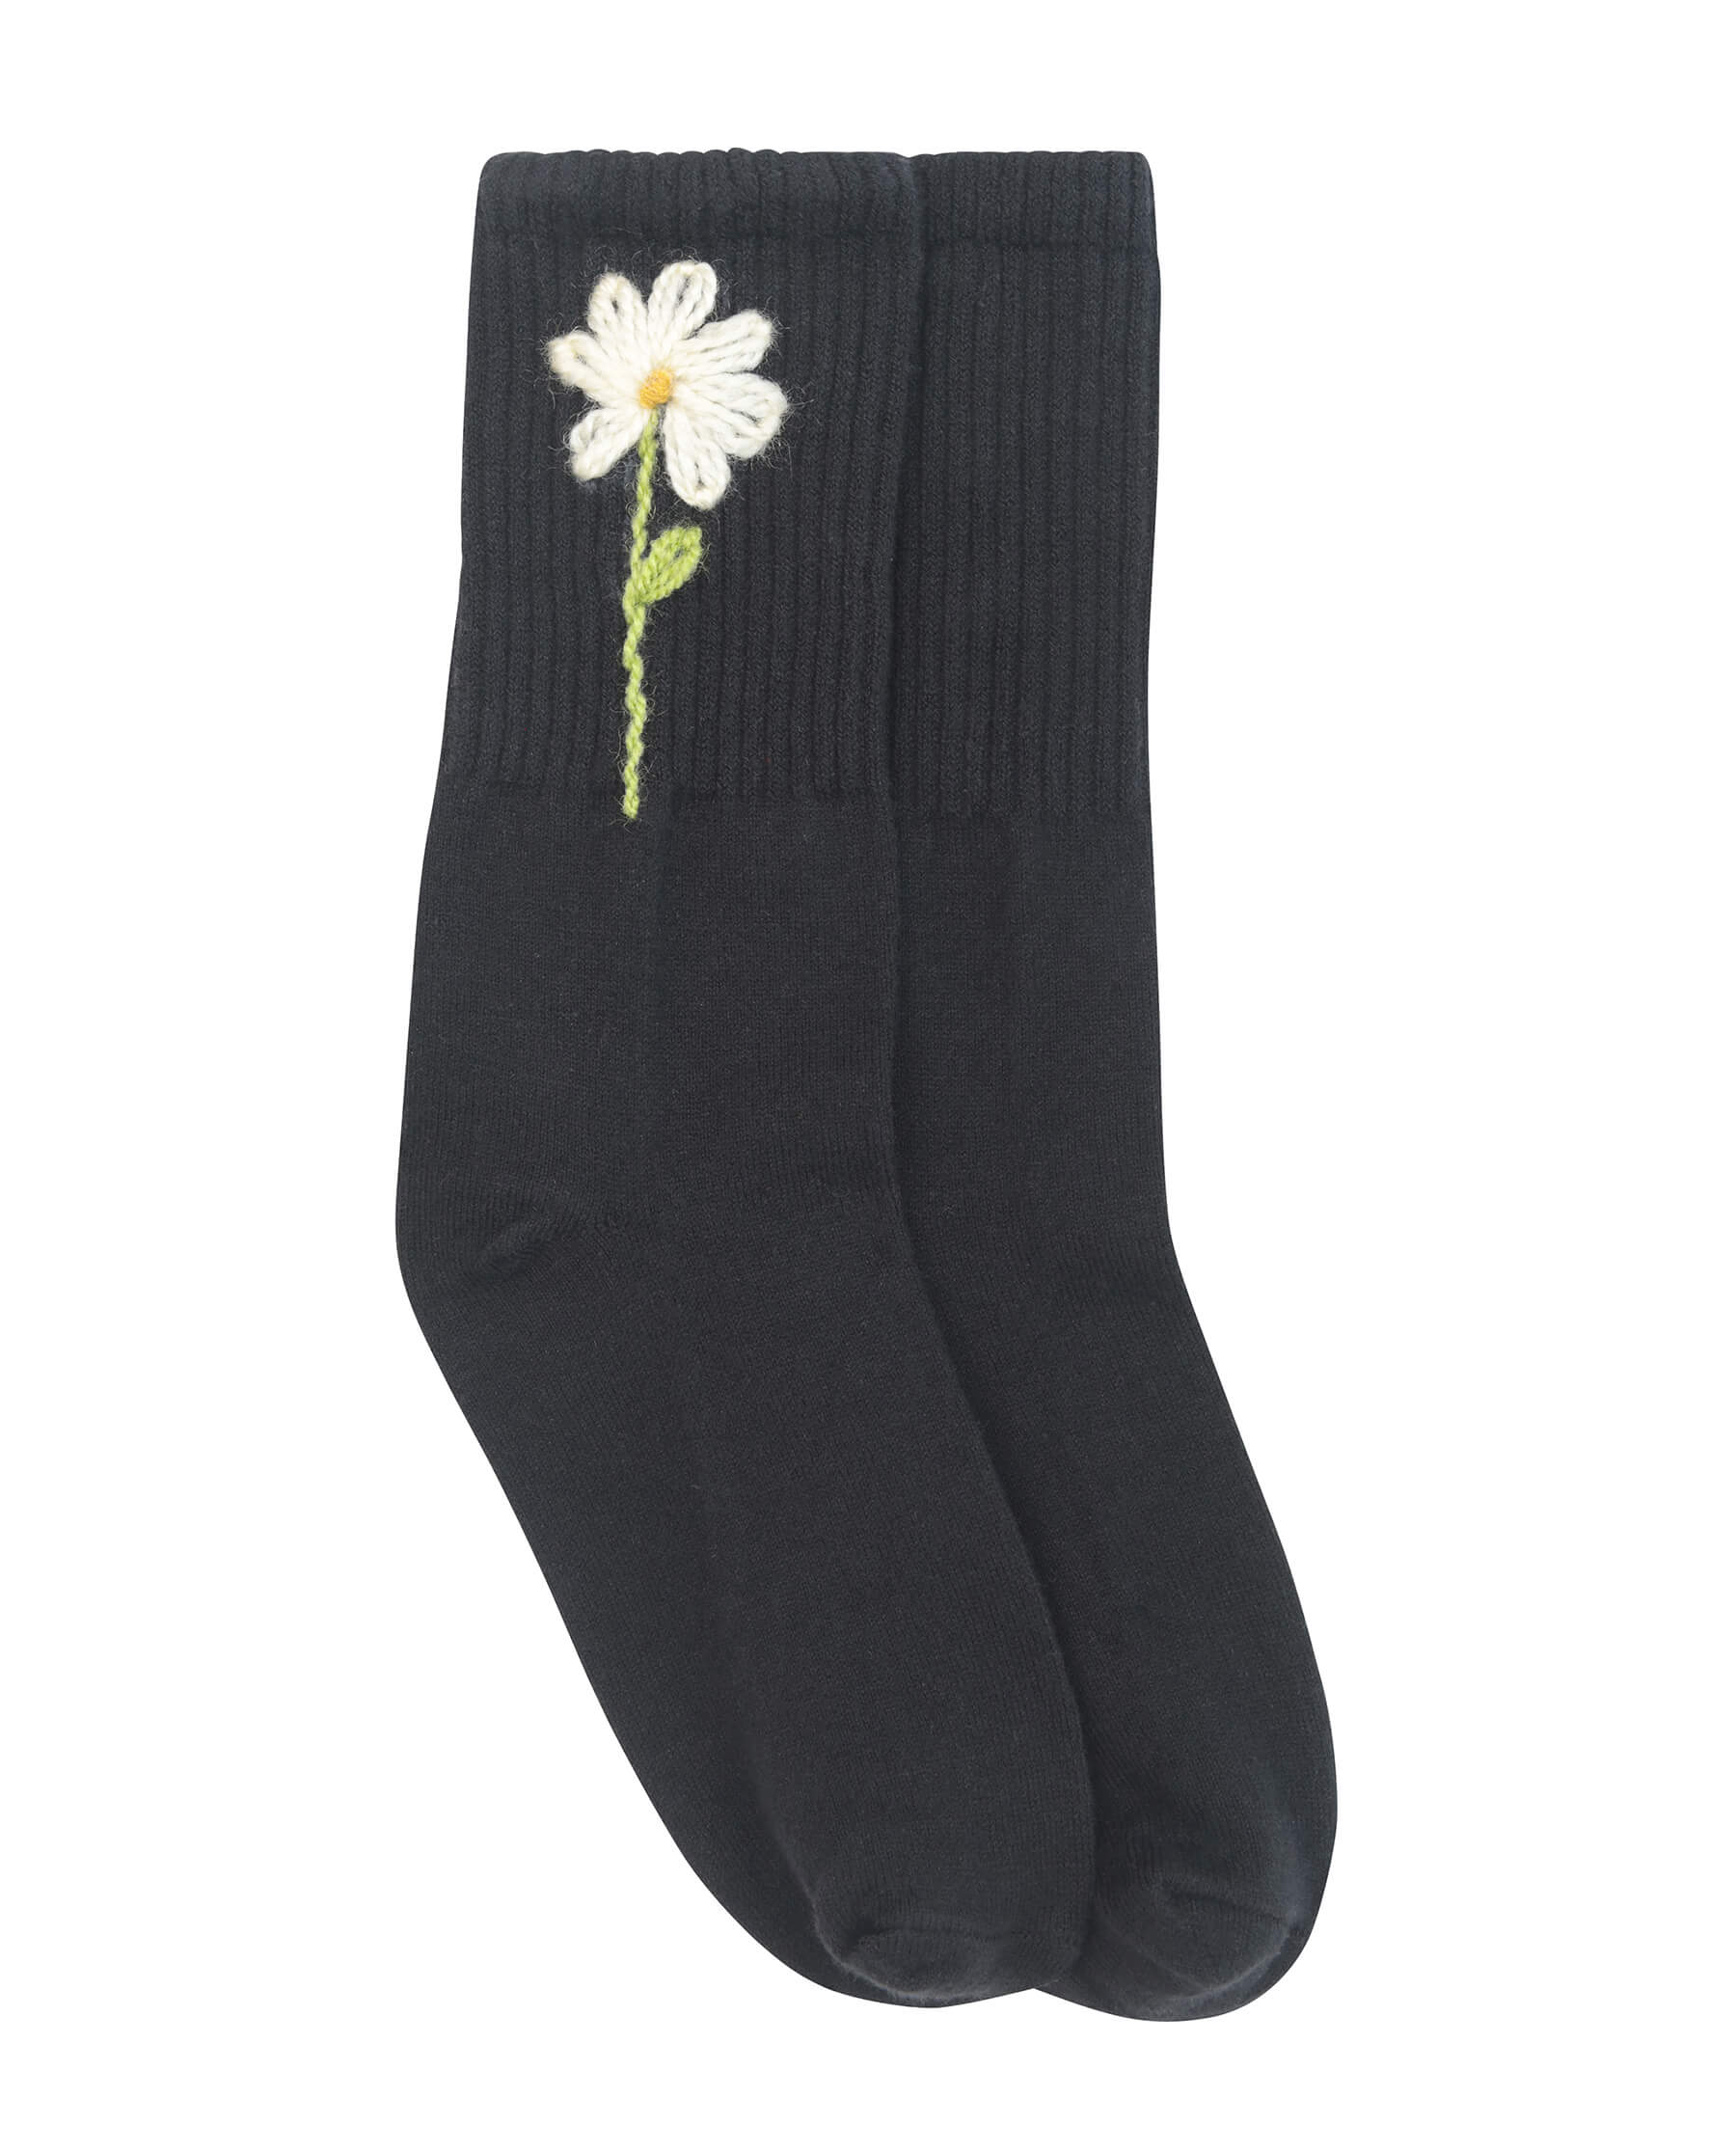 The Embroidered Daisy Crew Sock. -- Almost Black with Cream Flower